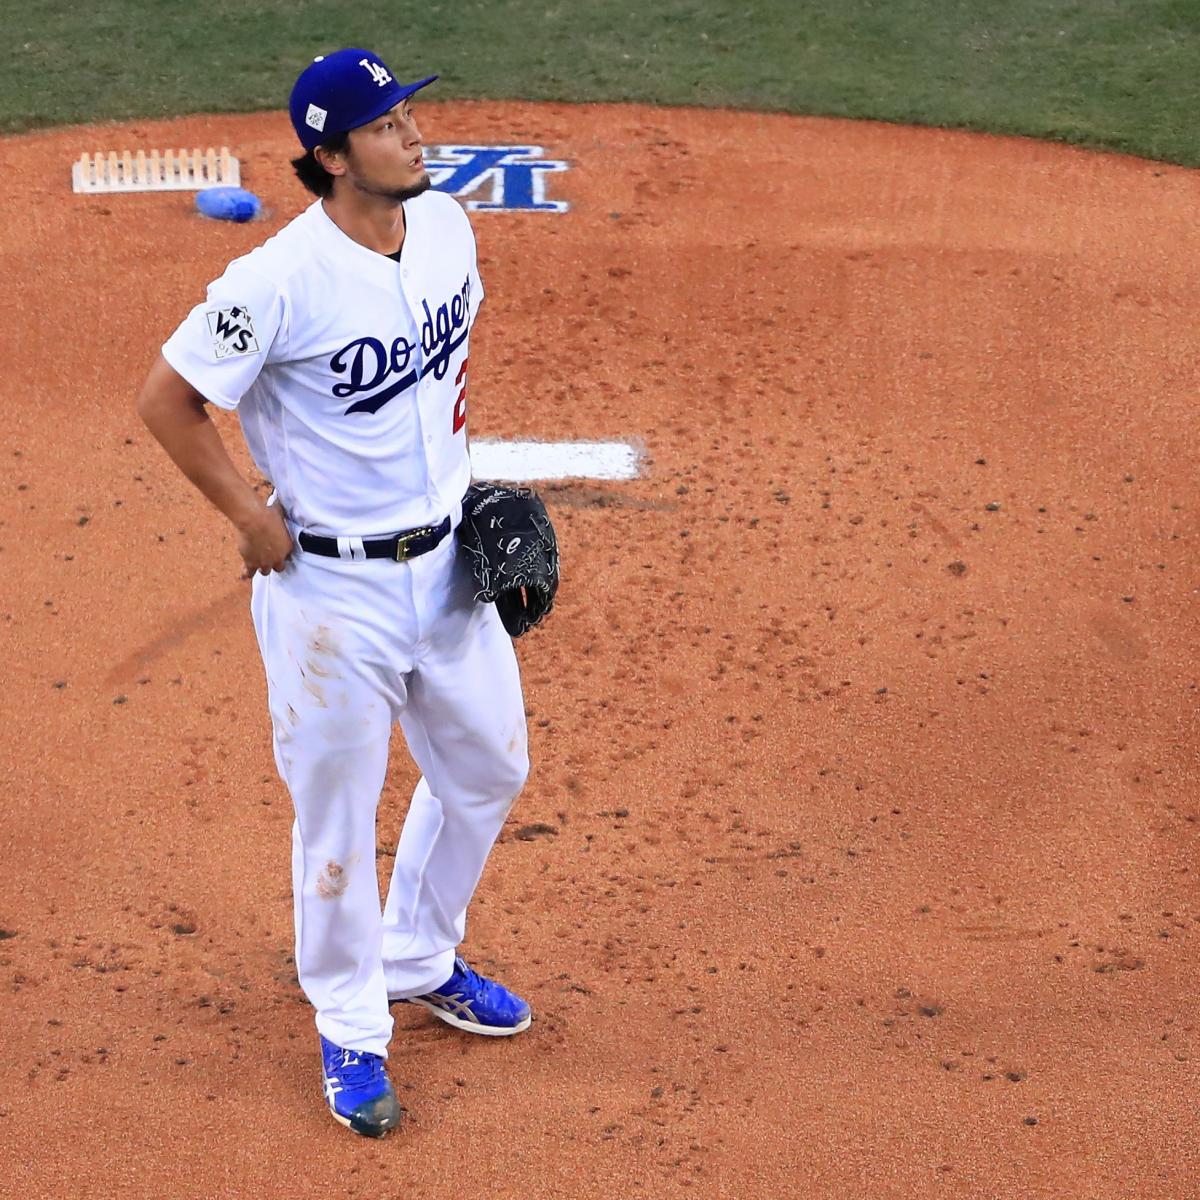 Yu Darvish's World Series Game 7 start is a disaster for Dodgers